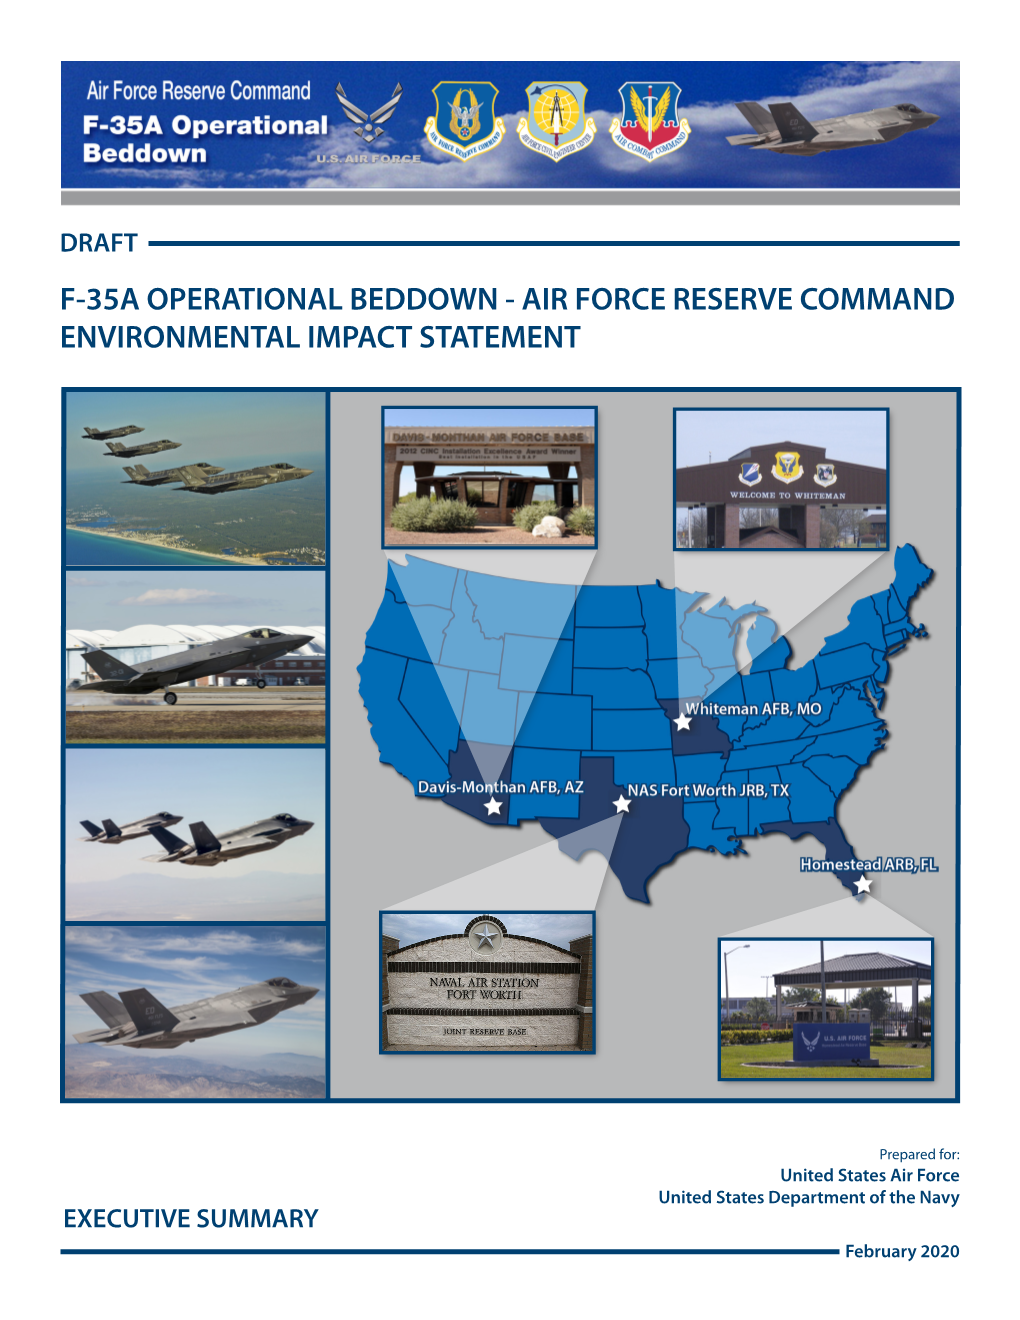 Draft F-35A Operational Beddown - Air Force Reserve Command Environmental Impact Statement